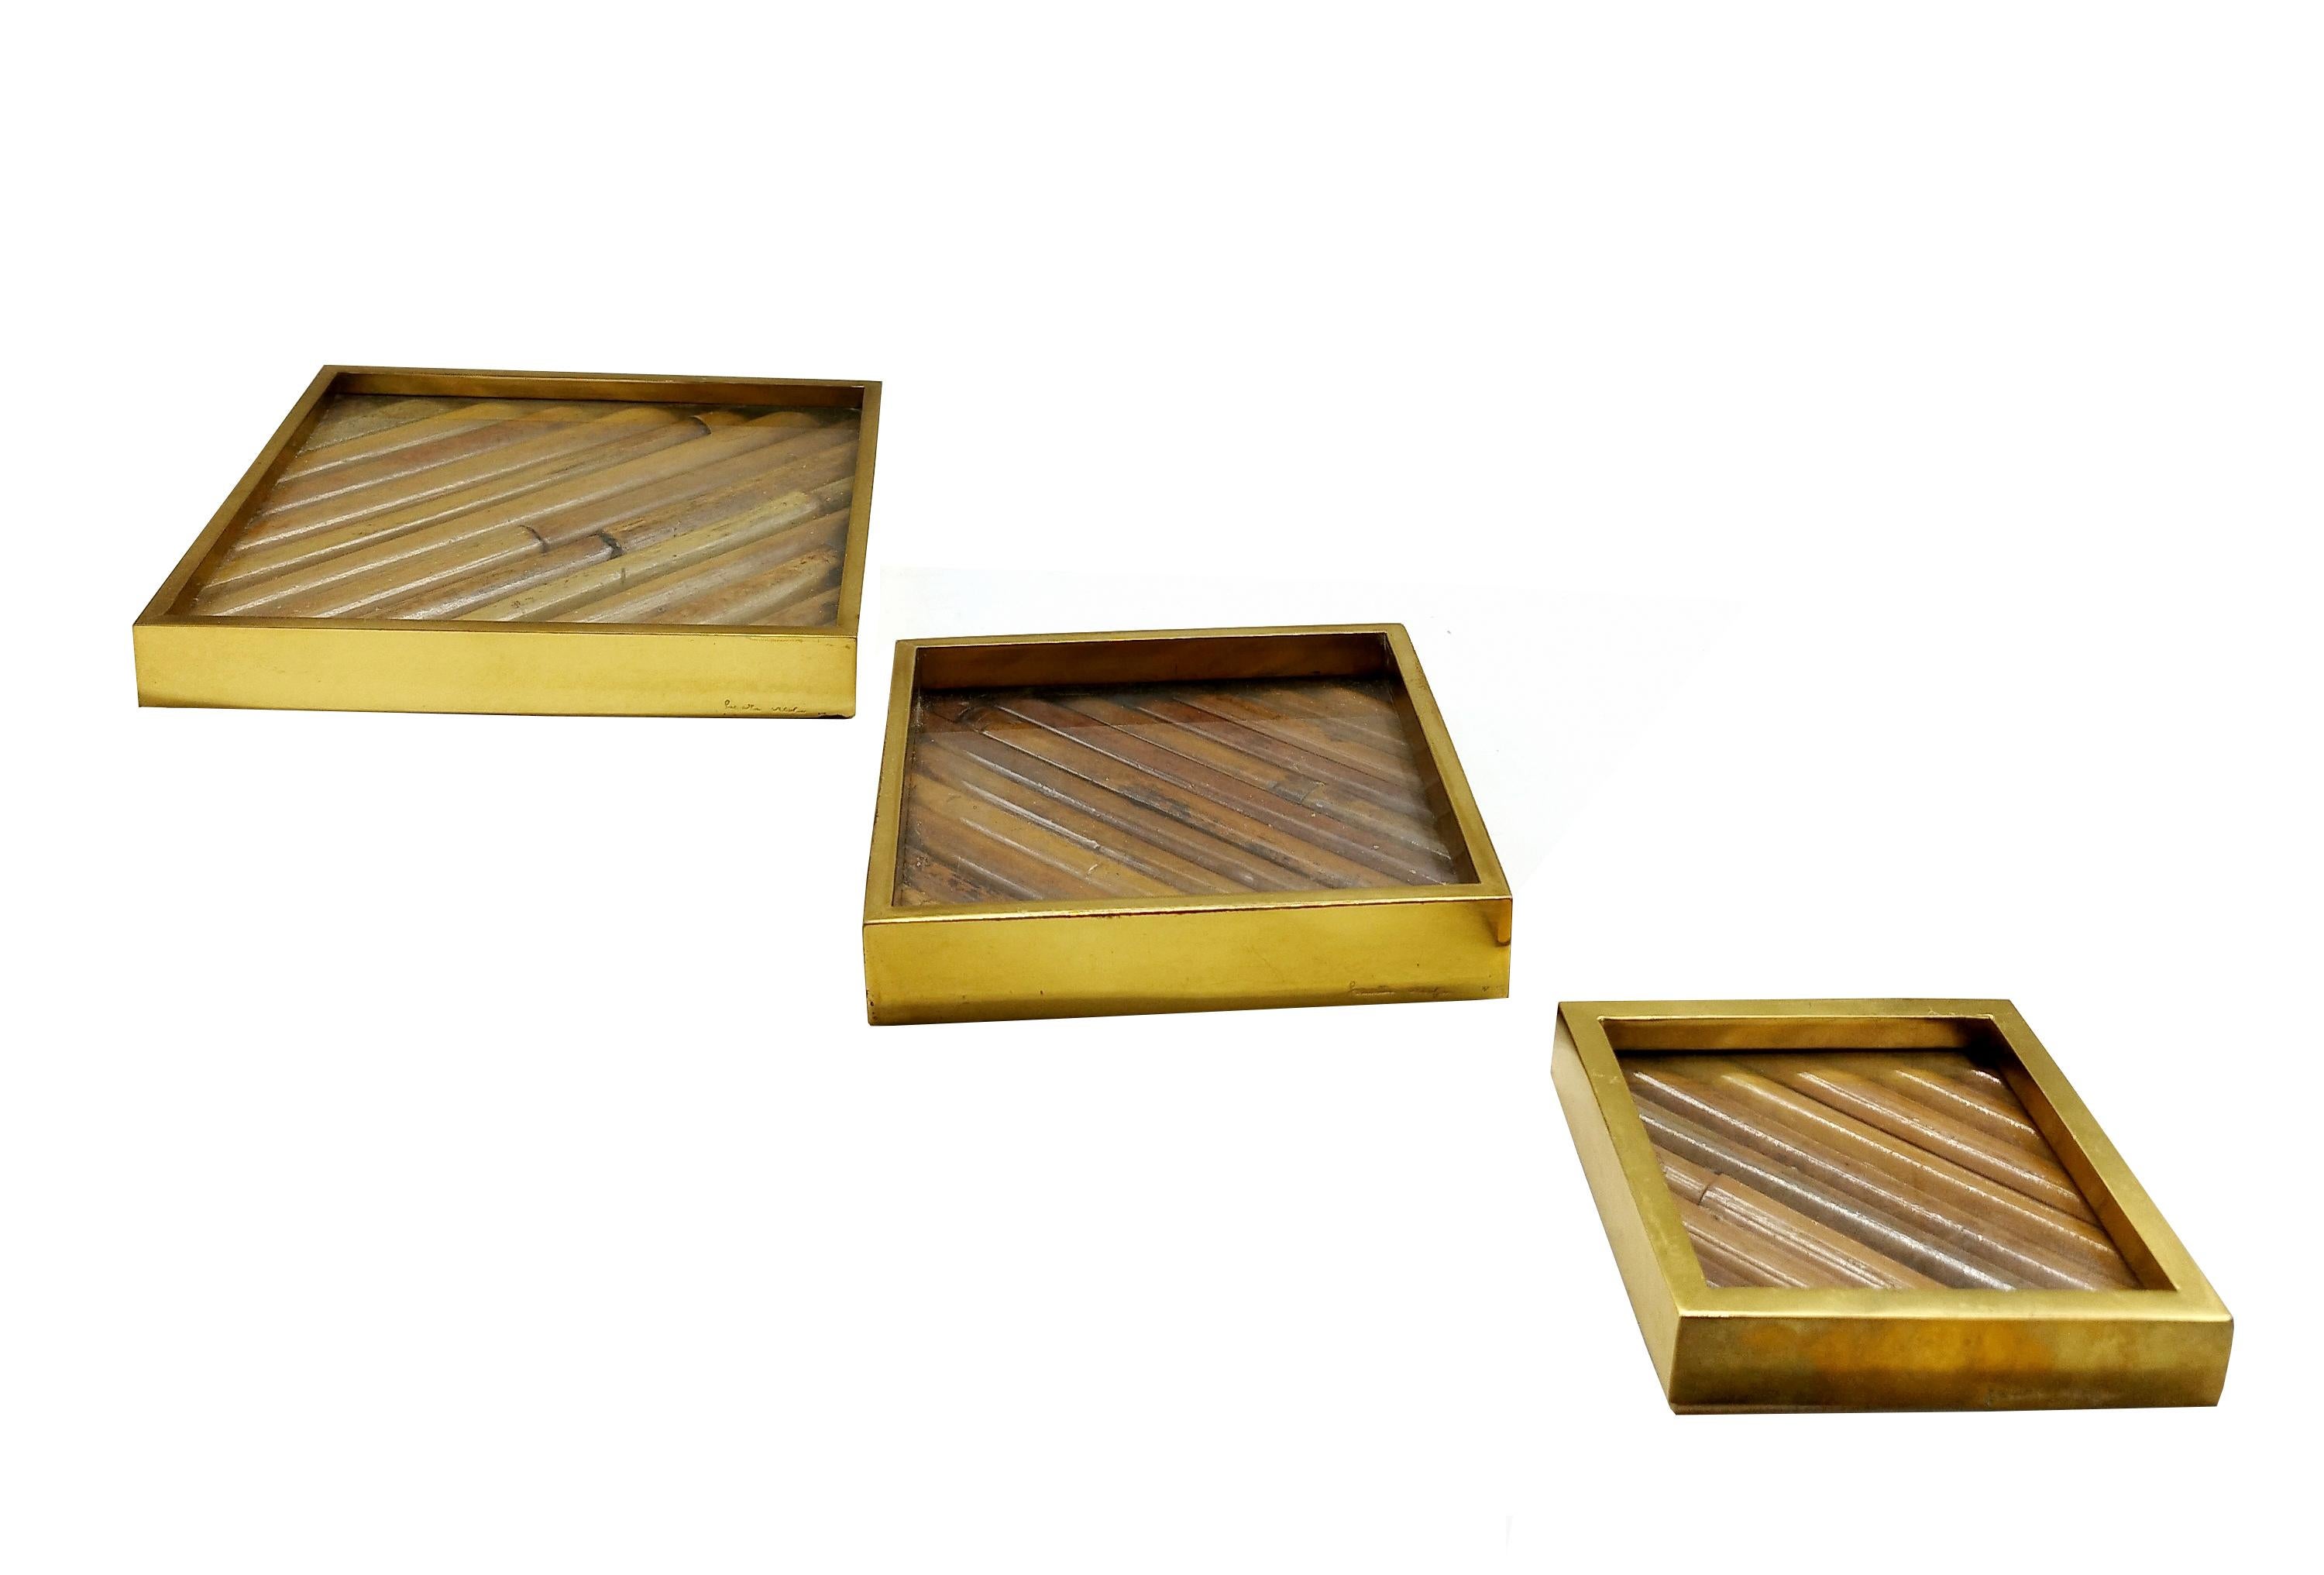 Gabriella Crespi, rare set of Rising Sun series tidy boxes with lacquered bamboo strips framed by polished brass sides and glass interior, Italy, 1970s.  Imprinted with Gabriella Crespi's signature on the side of each piece.  This elegant bamboo set